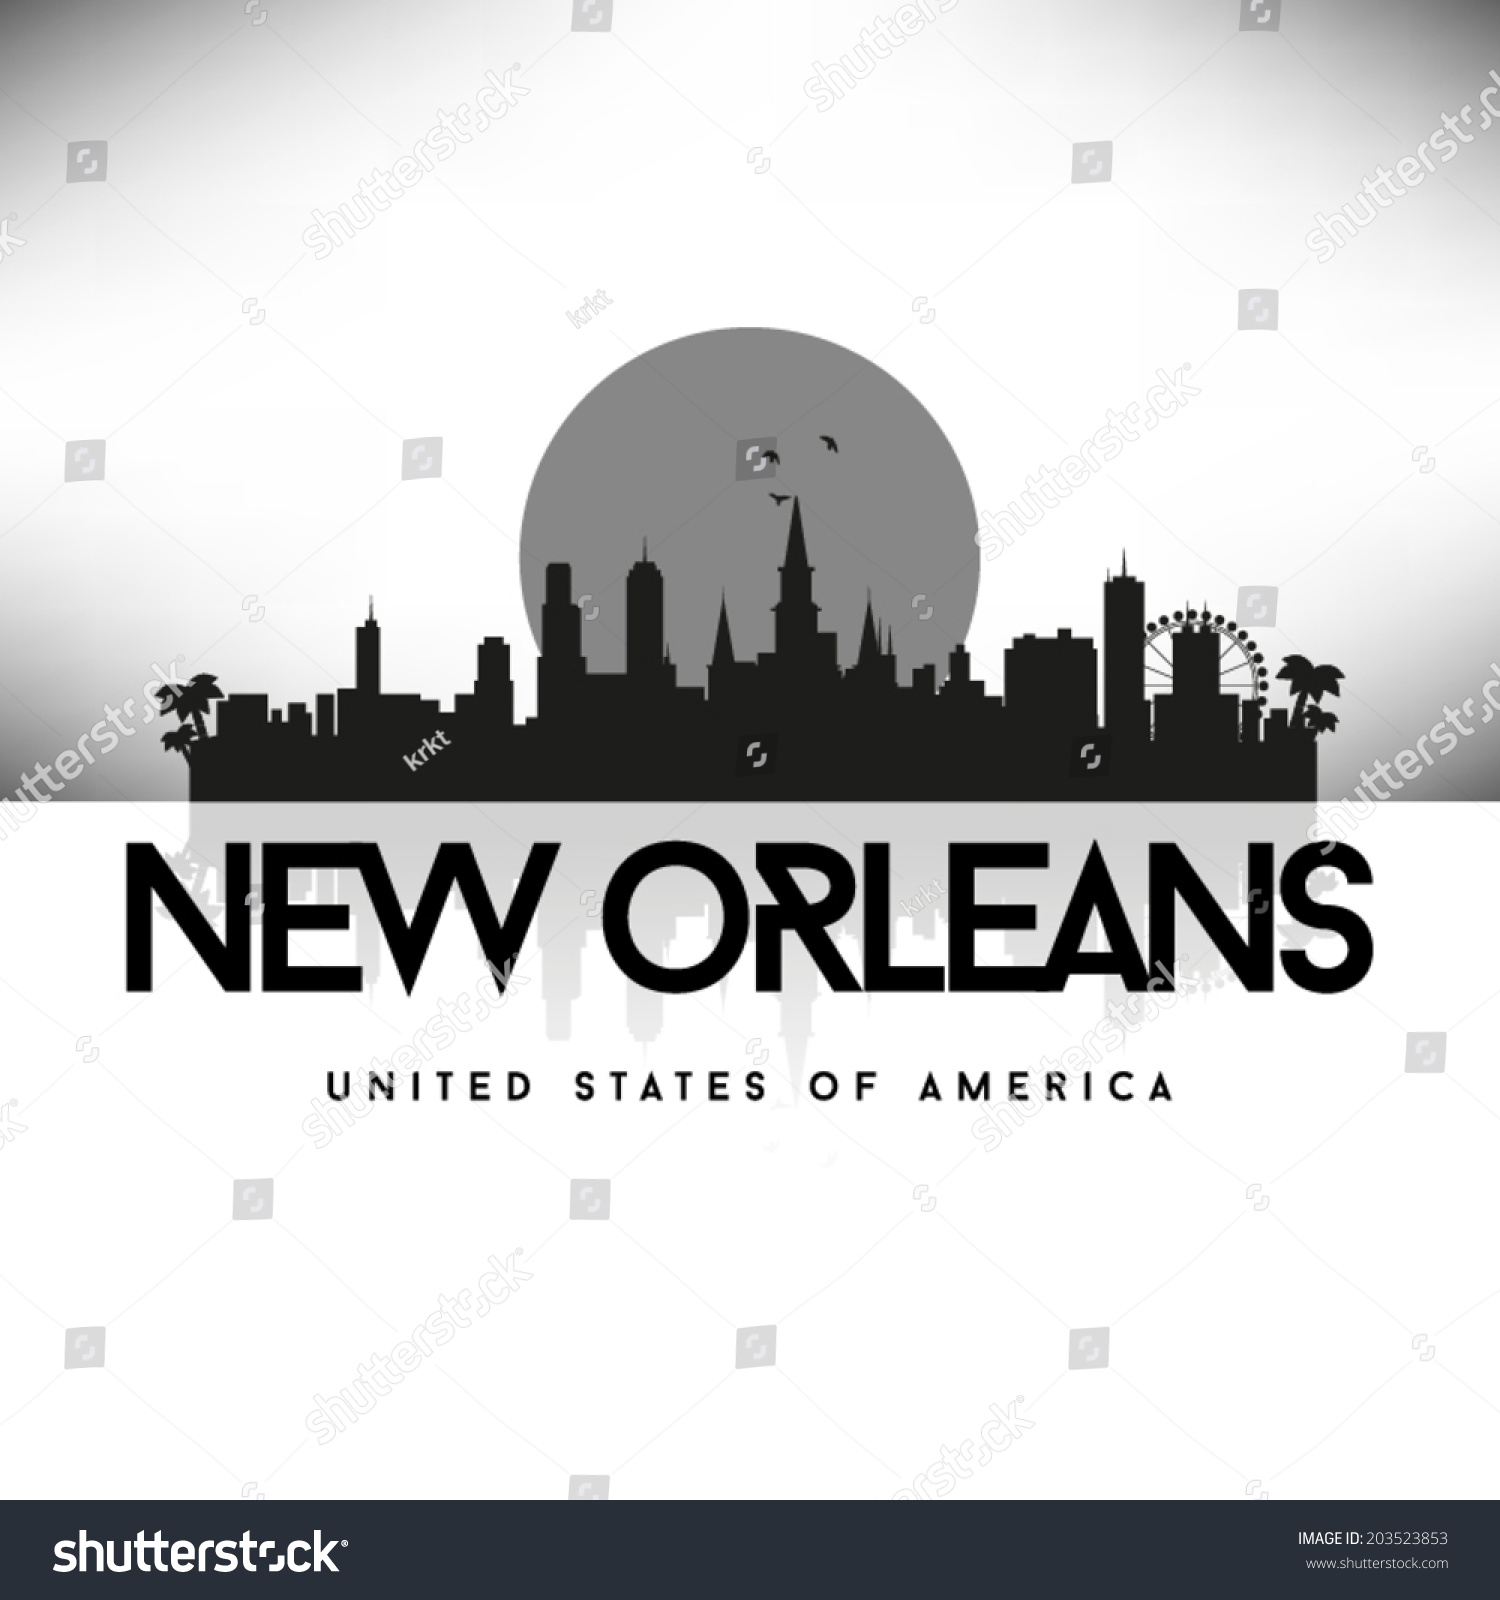 new orleans clipart - photo #23